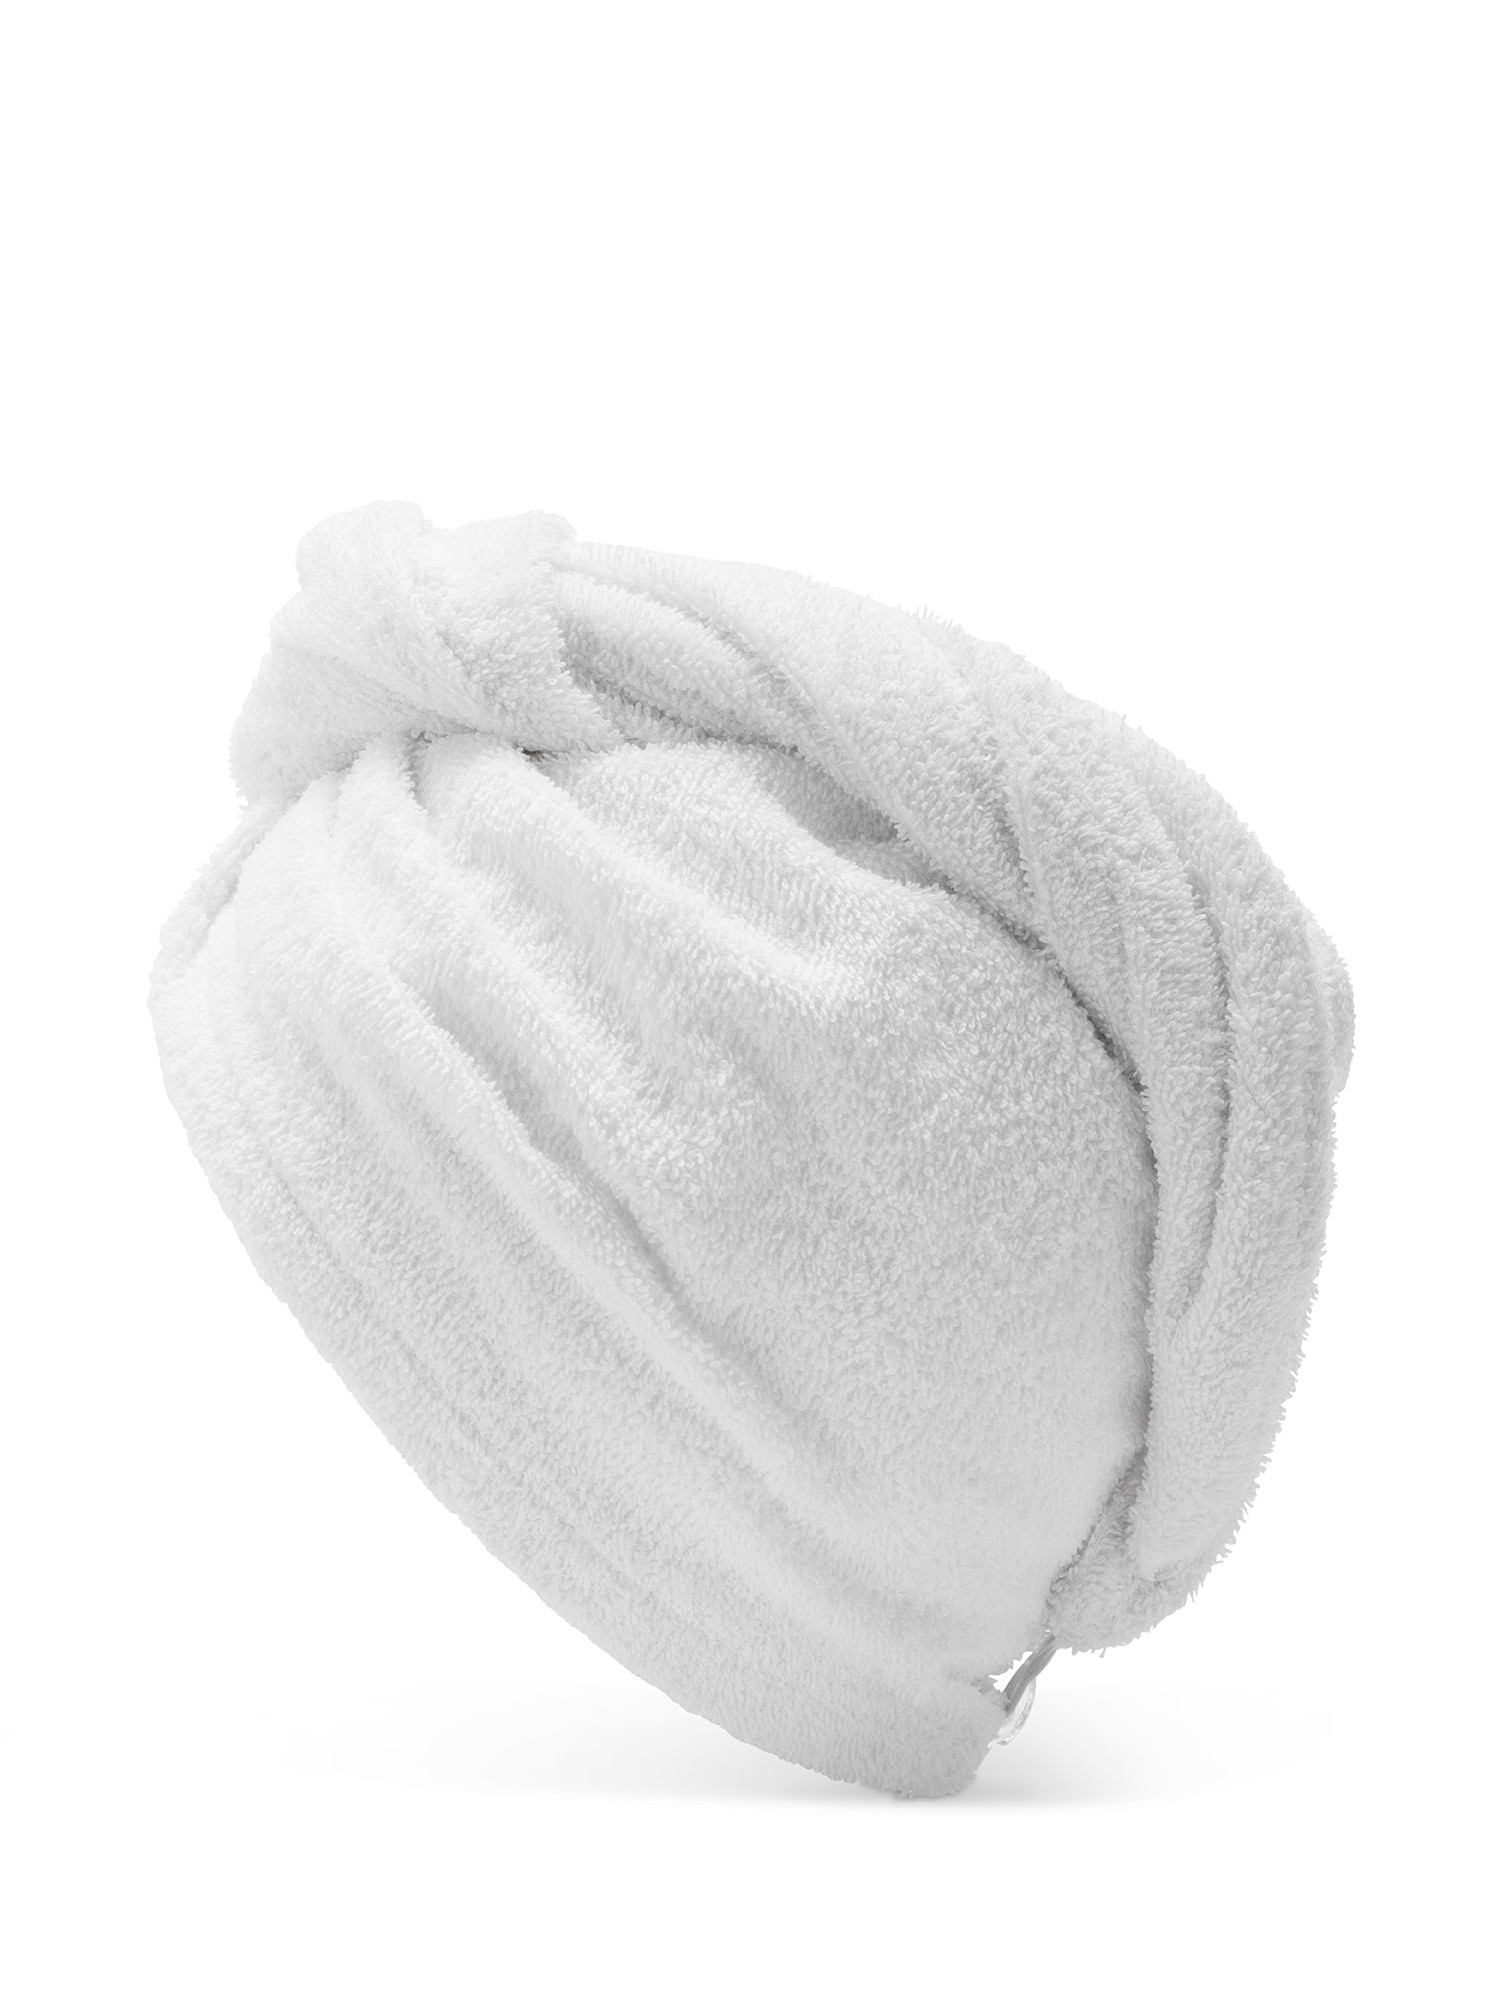 Turban beauty band bath towel set in cotton terry, White, large image number 4